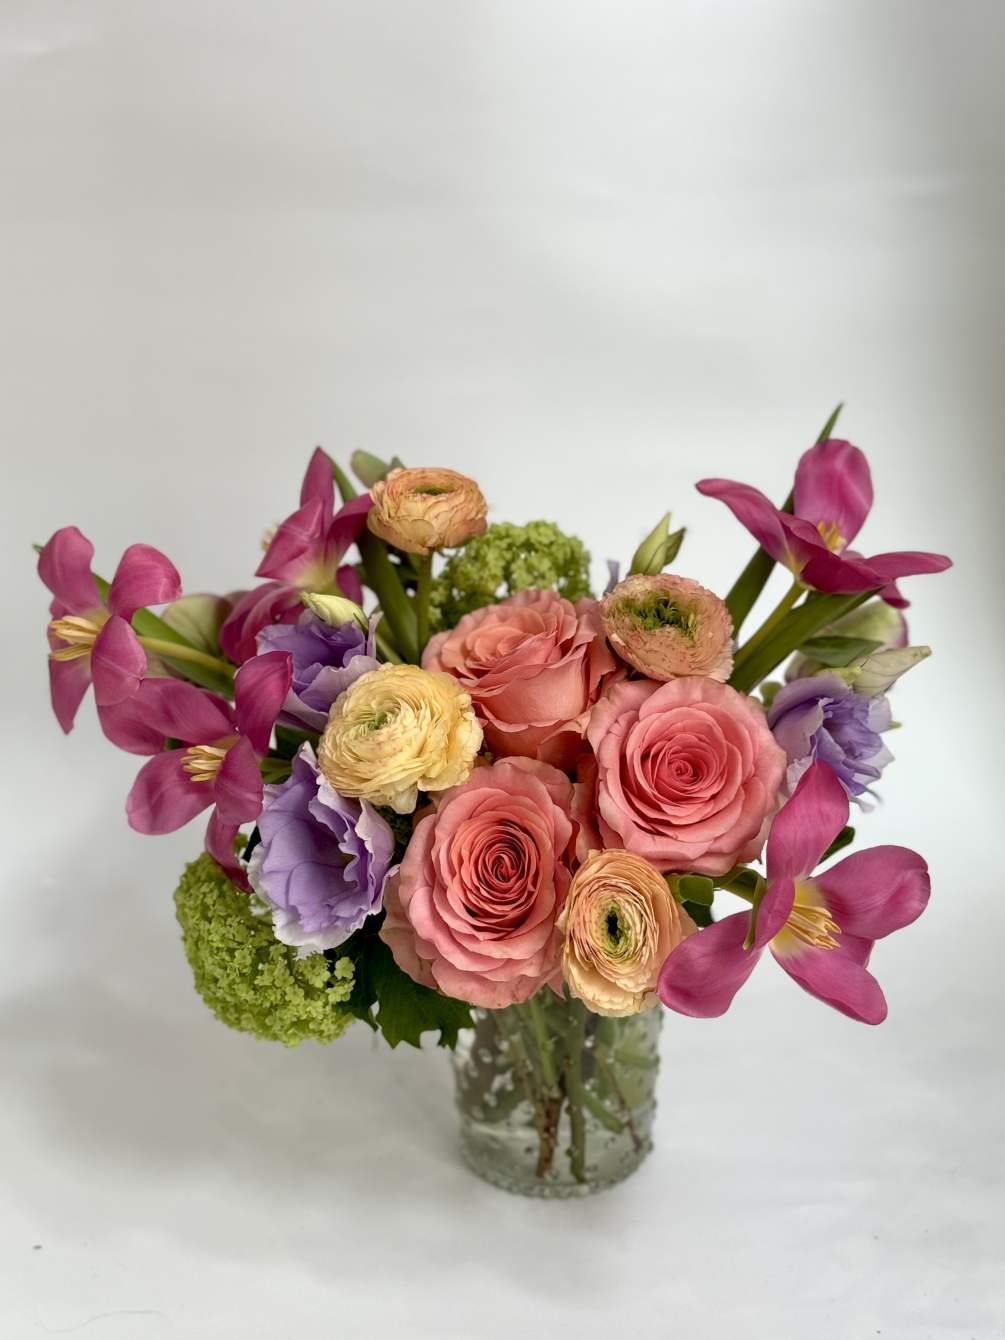 Whimsical and fun spring floral piece in a glass vase.